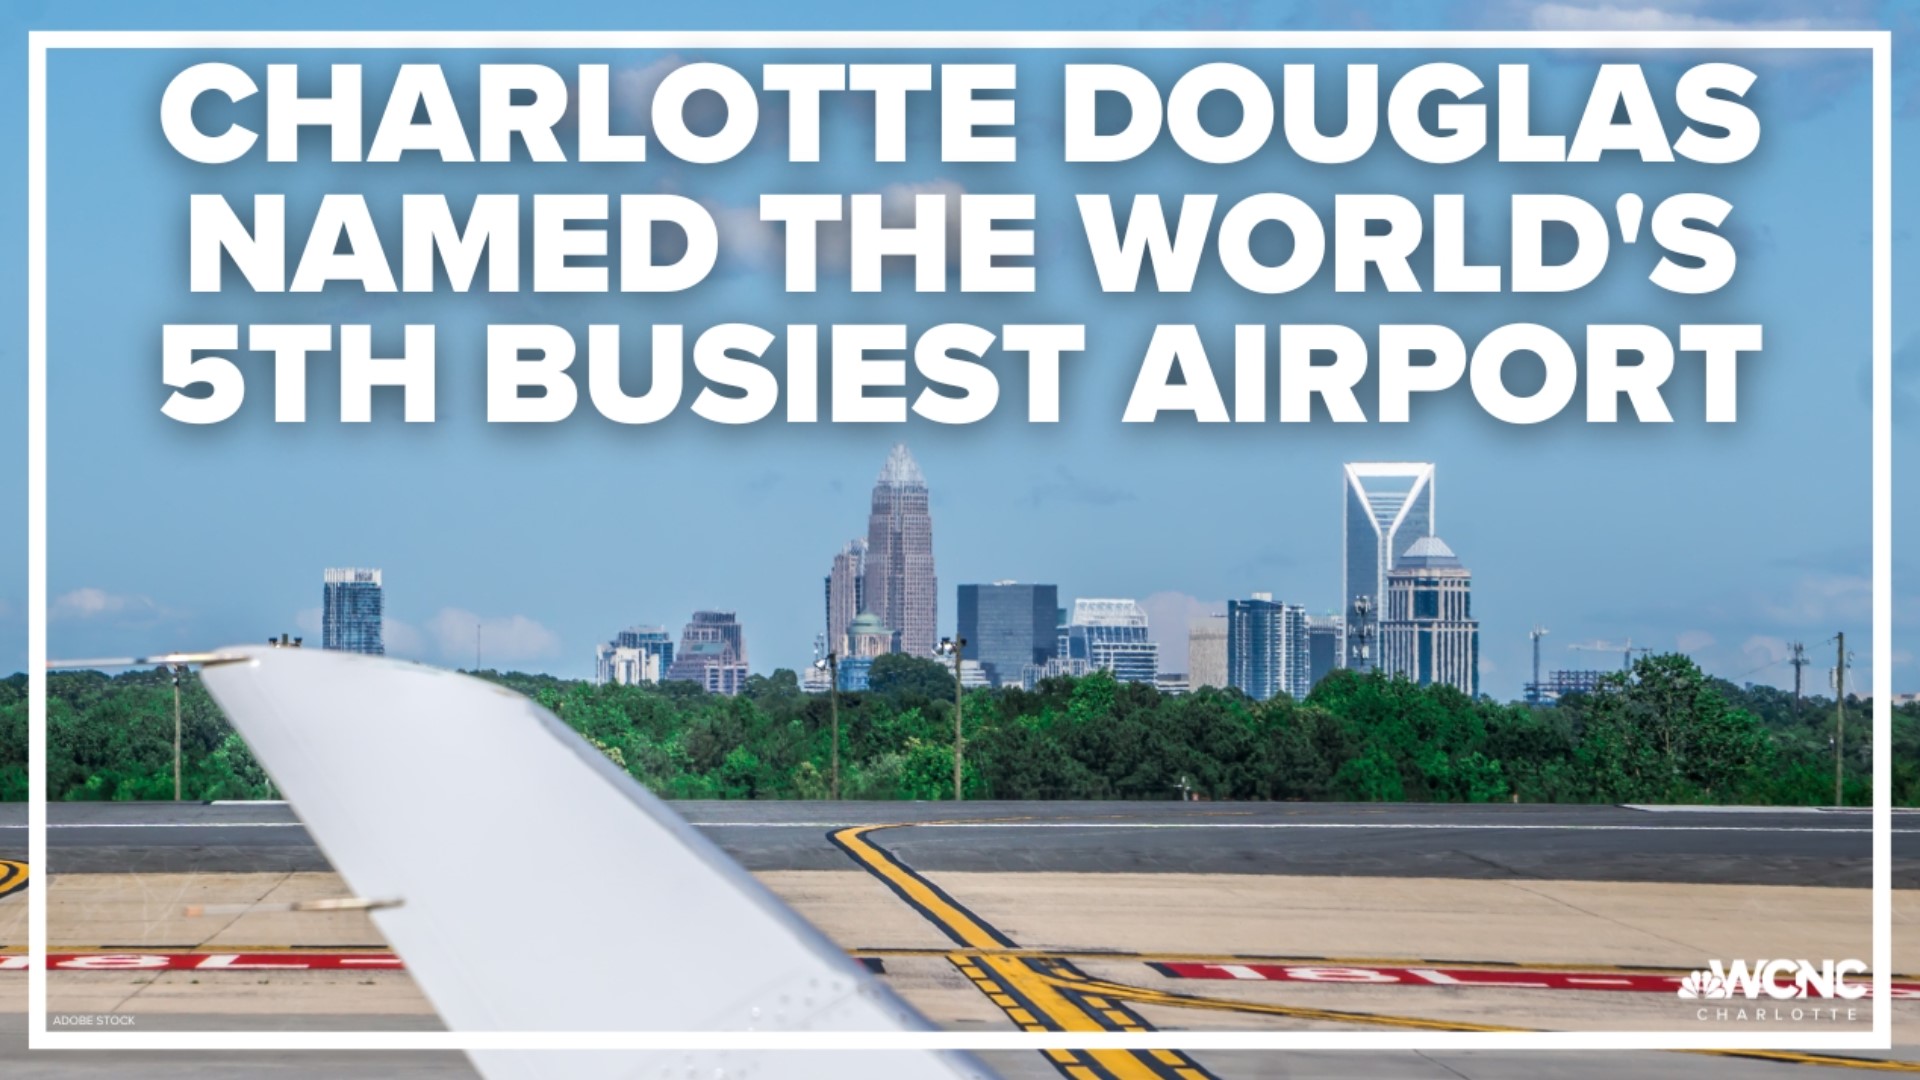 Charlotte Douglas International Airport was ranked the fifth busiest in the world for arrivals and departures.